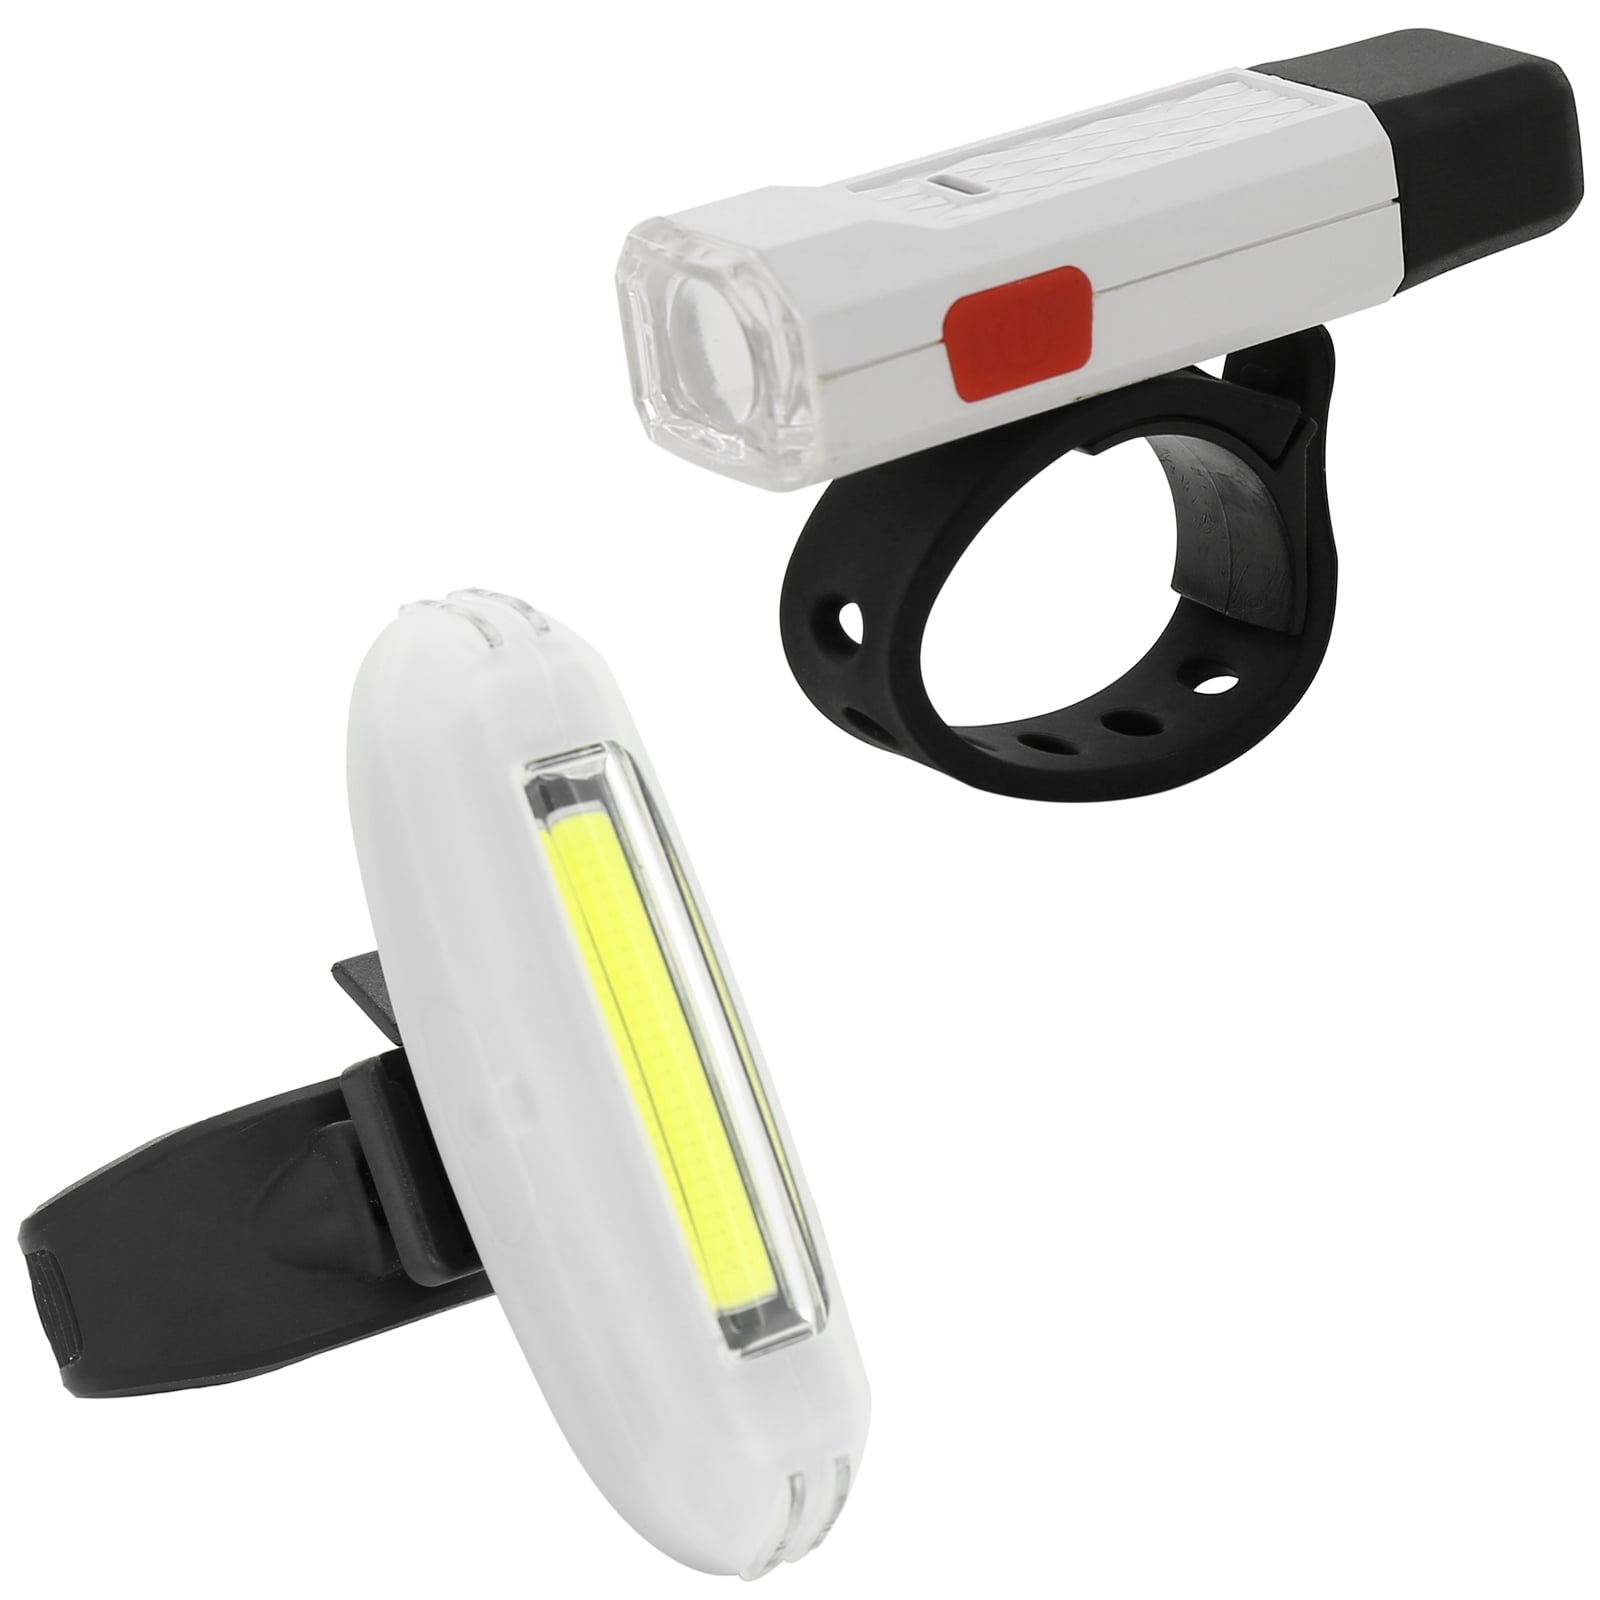 Details about   USB Rechargeable Bright LED Bicycle Bike Front Headlight and Rear Tail Light Set 